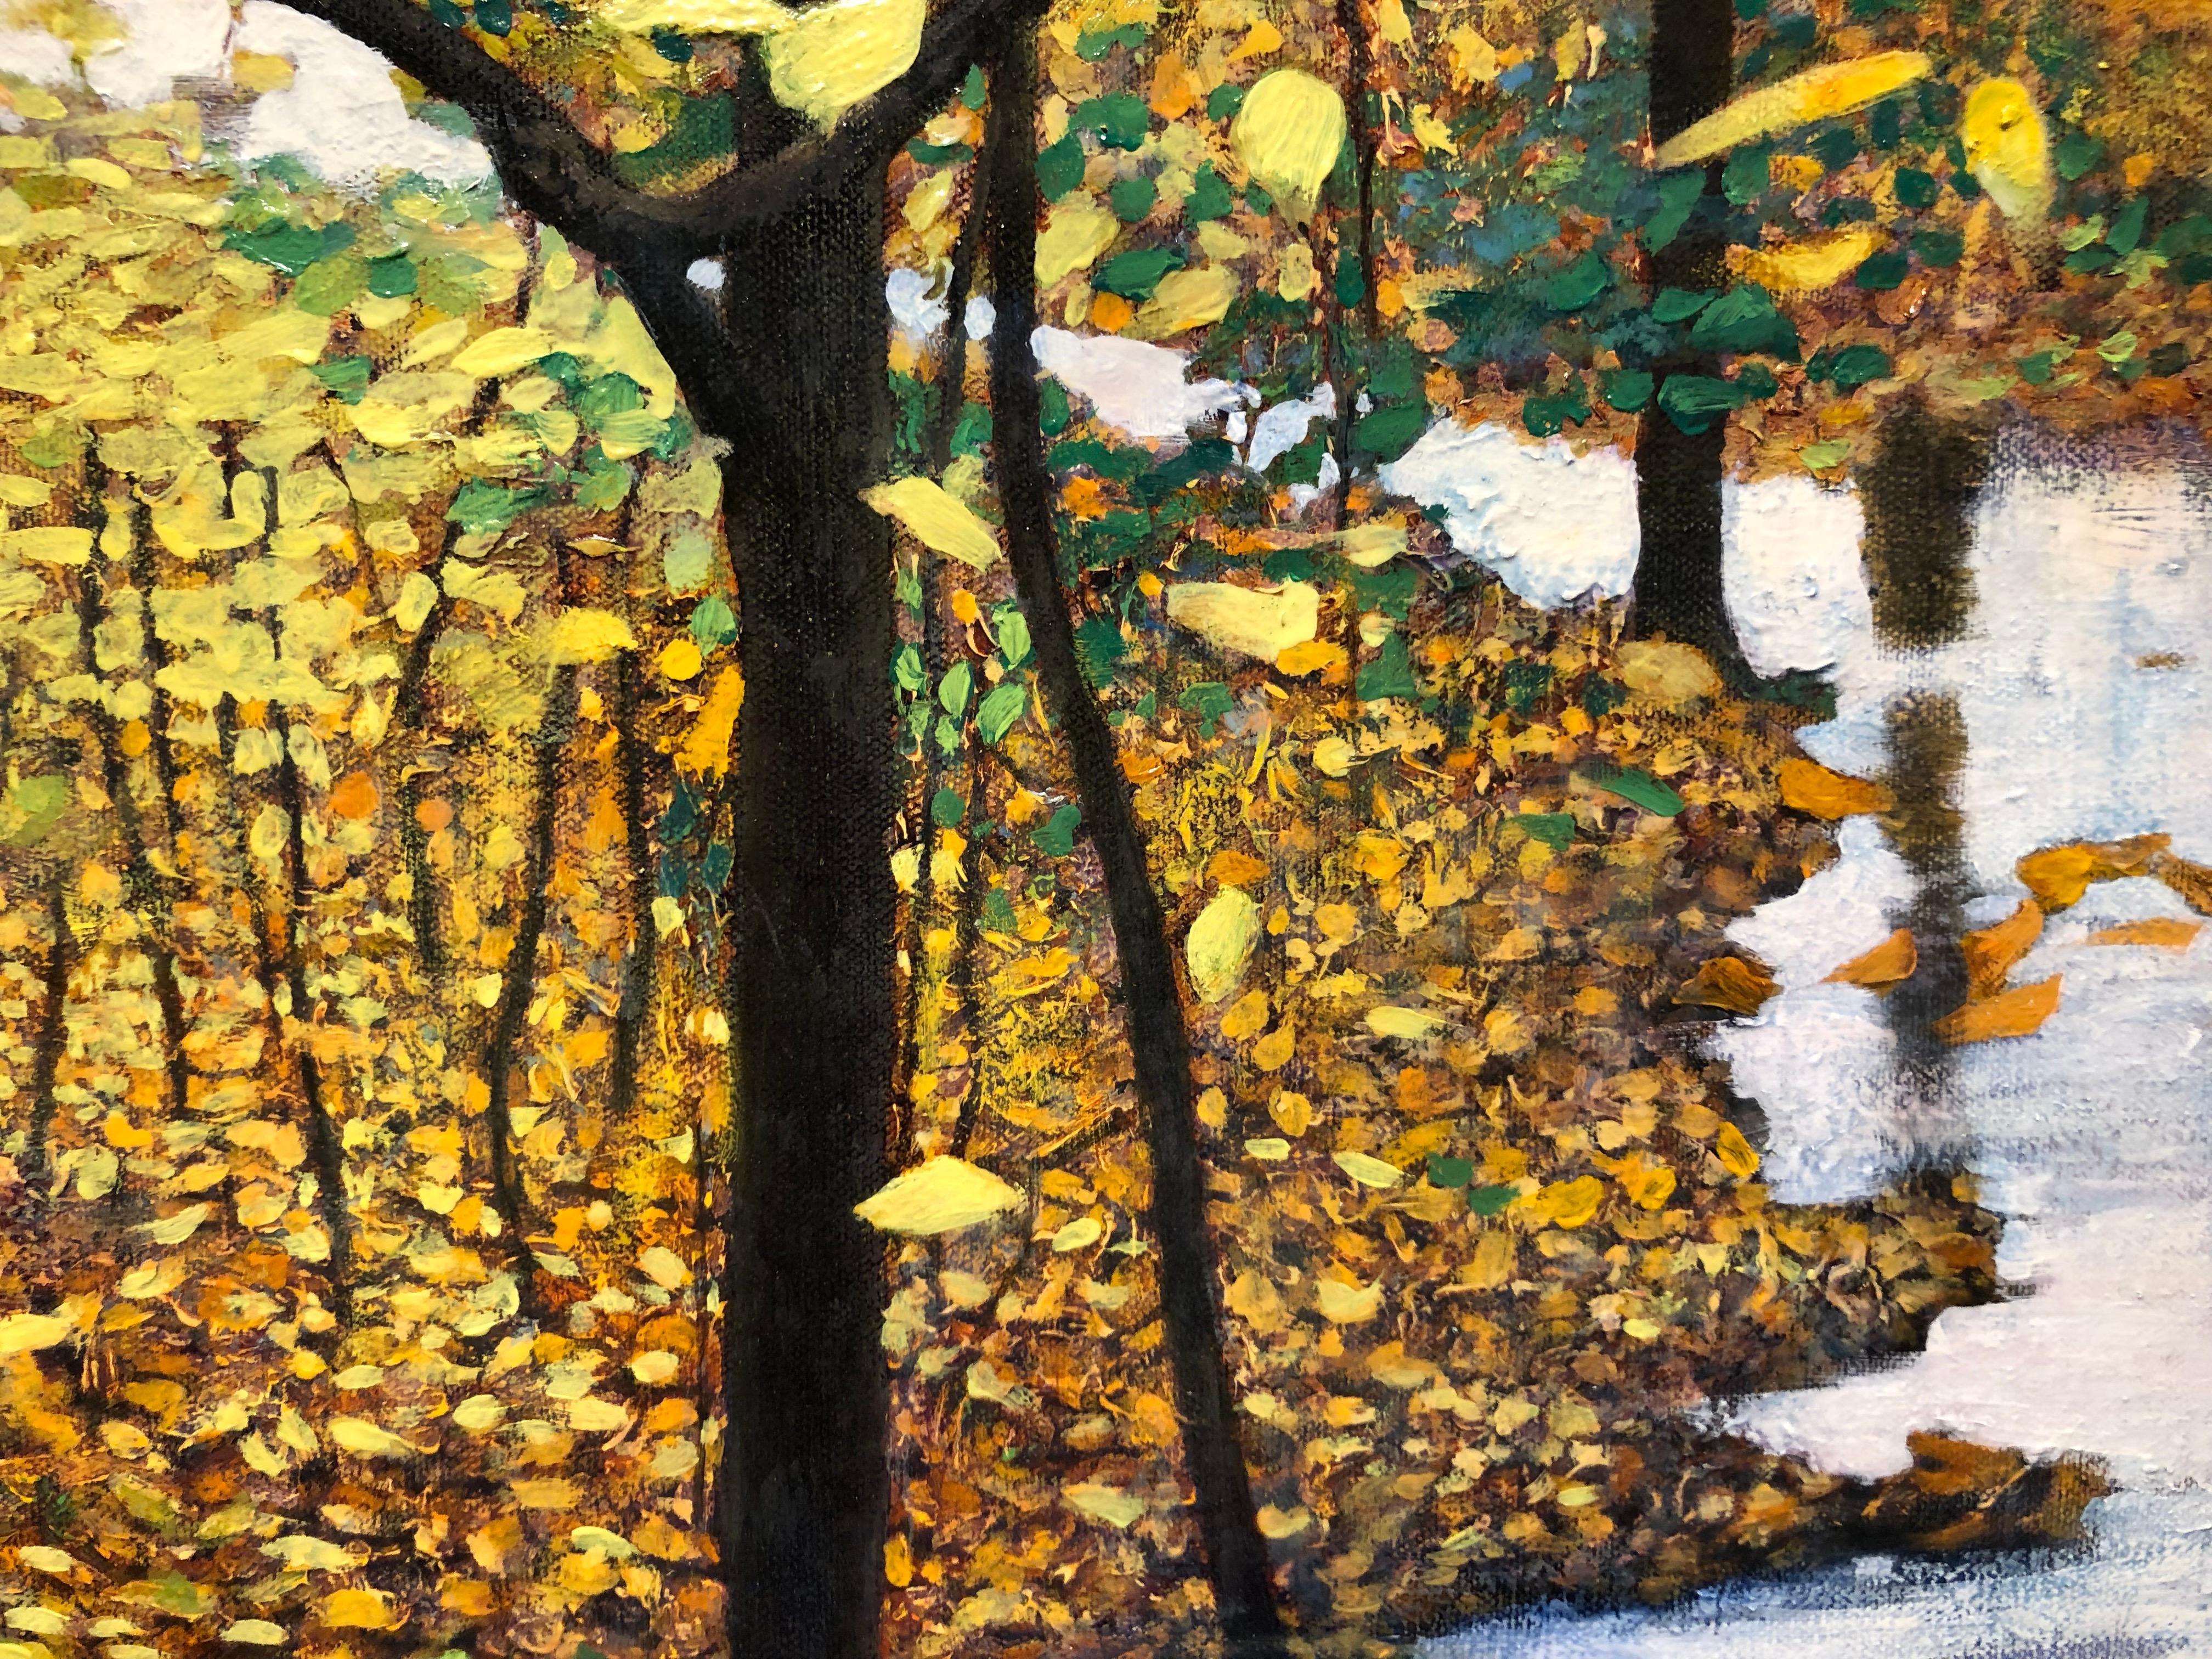 The Turning - Original Oil Painting of Stream and Trees with Leaf Covered Forest 6